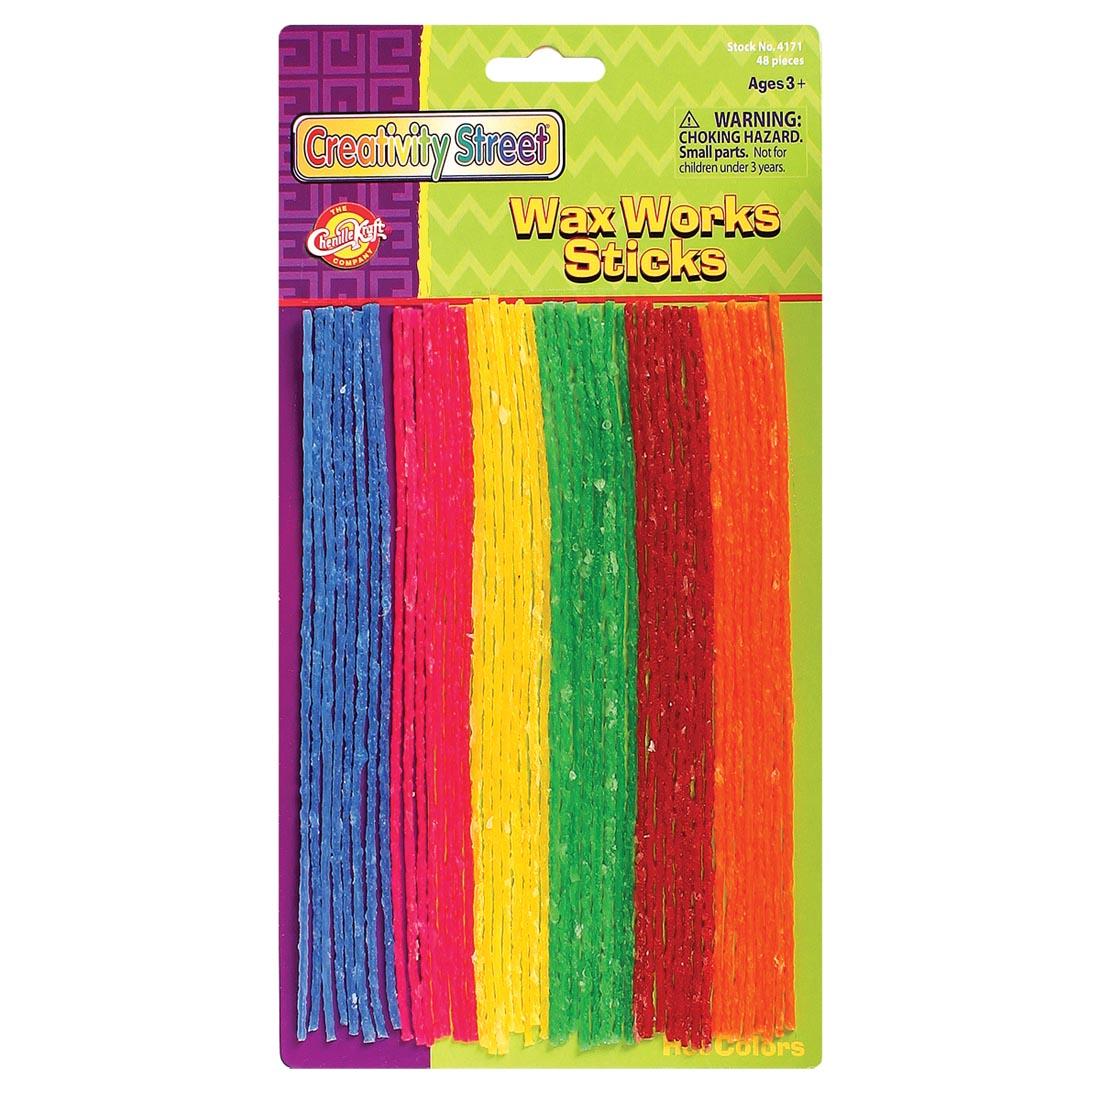 Creativity Street wax works sticks in assorted hot colors